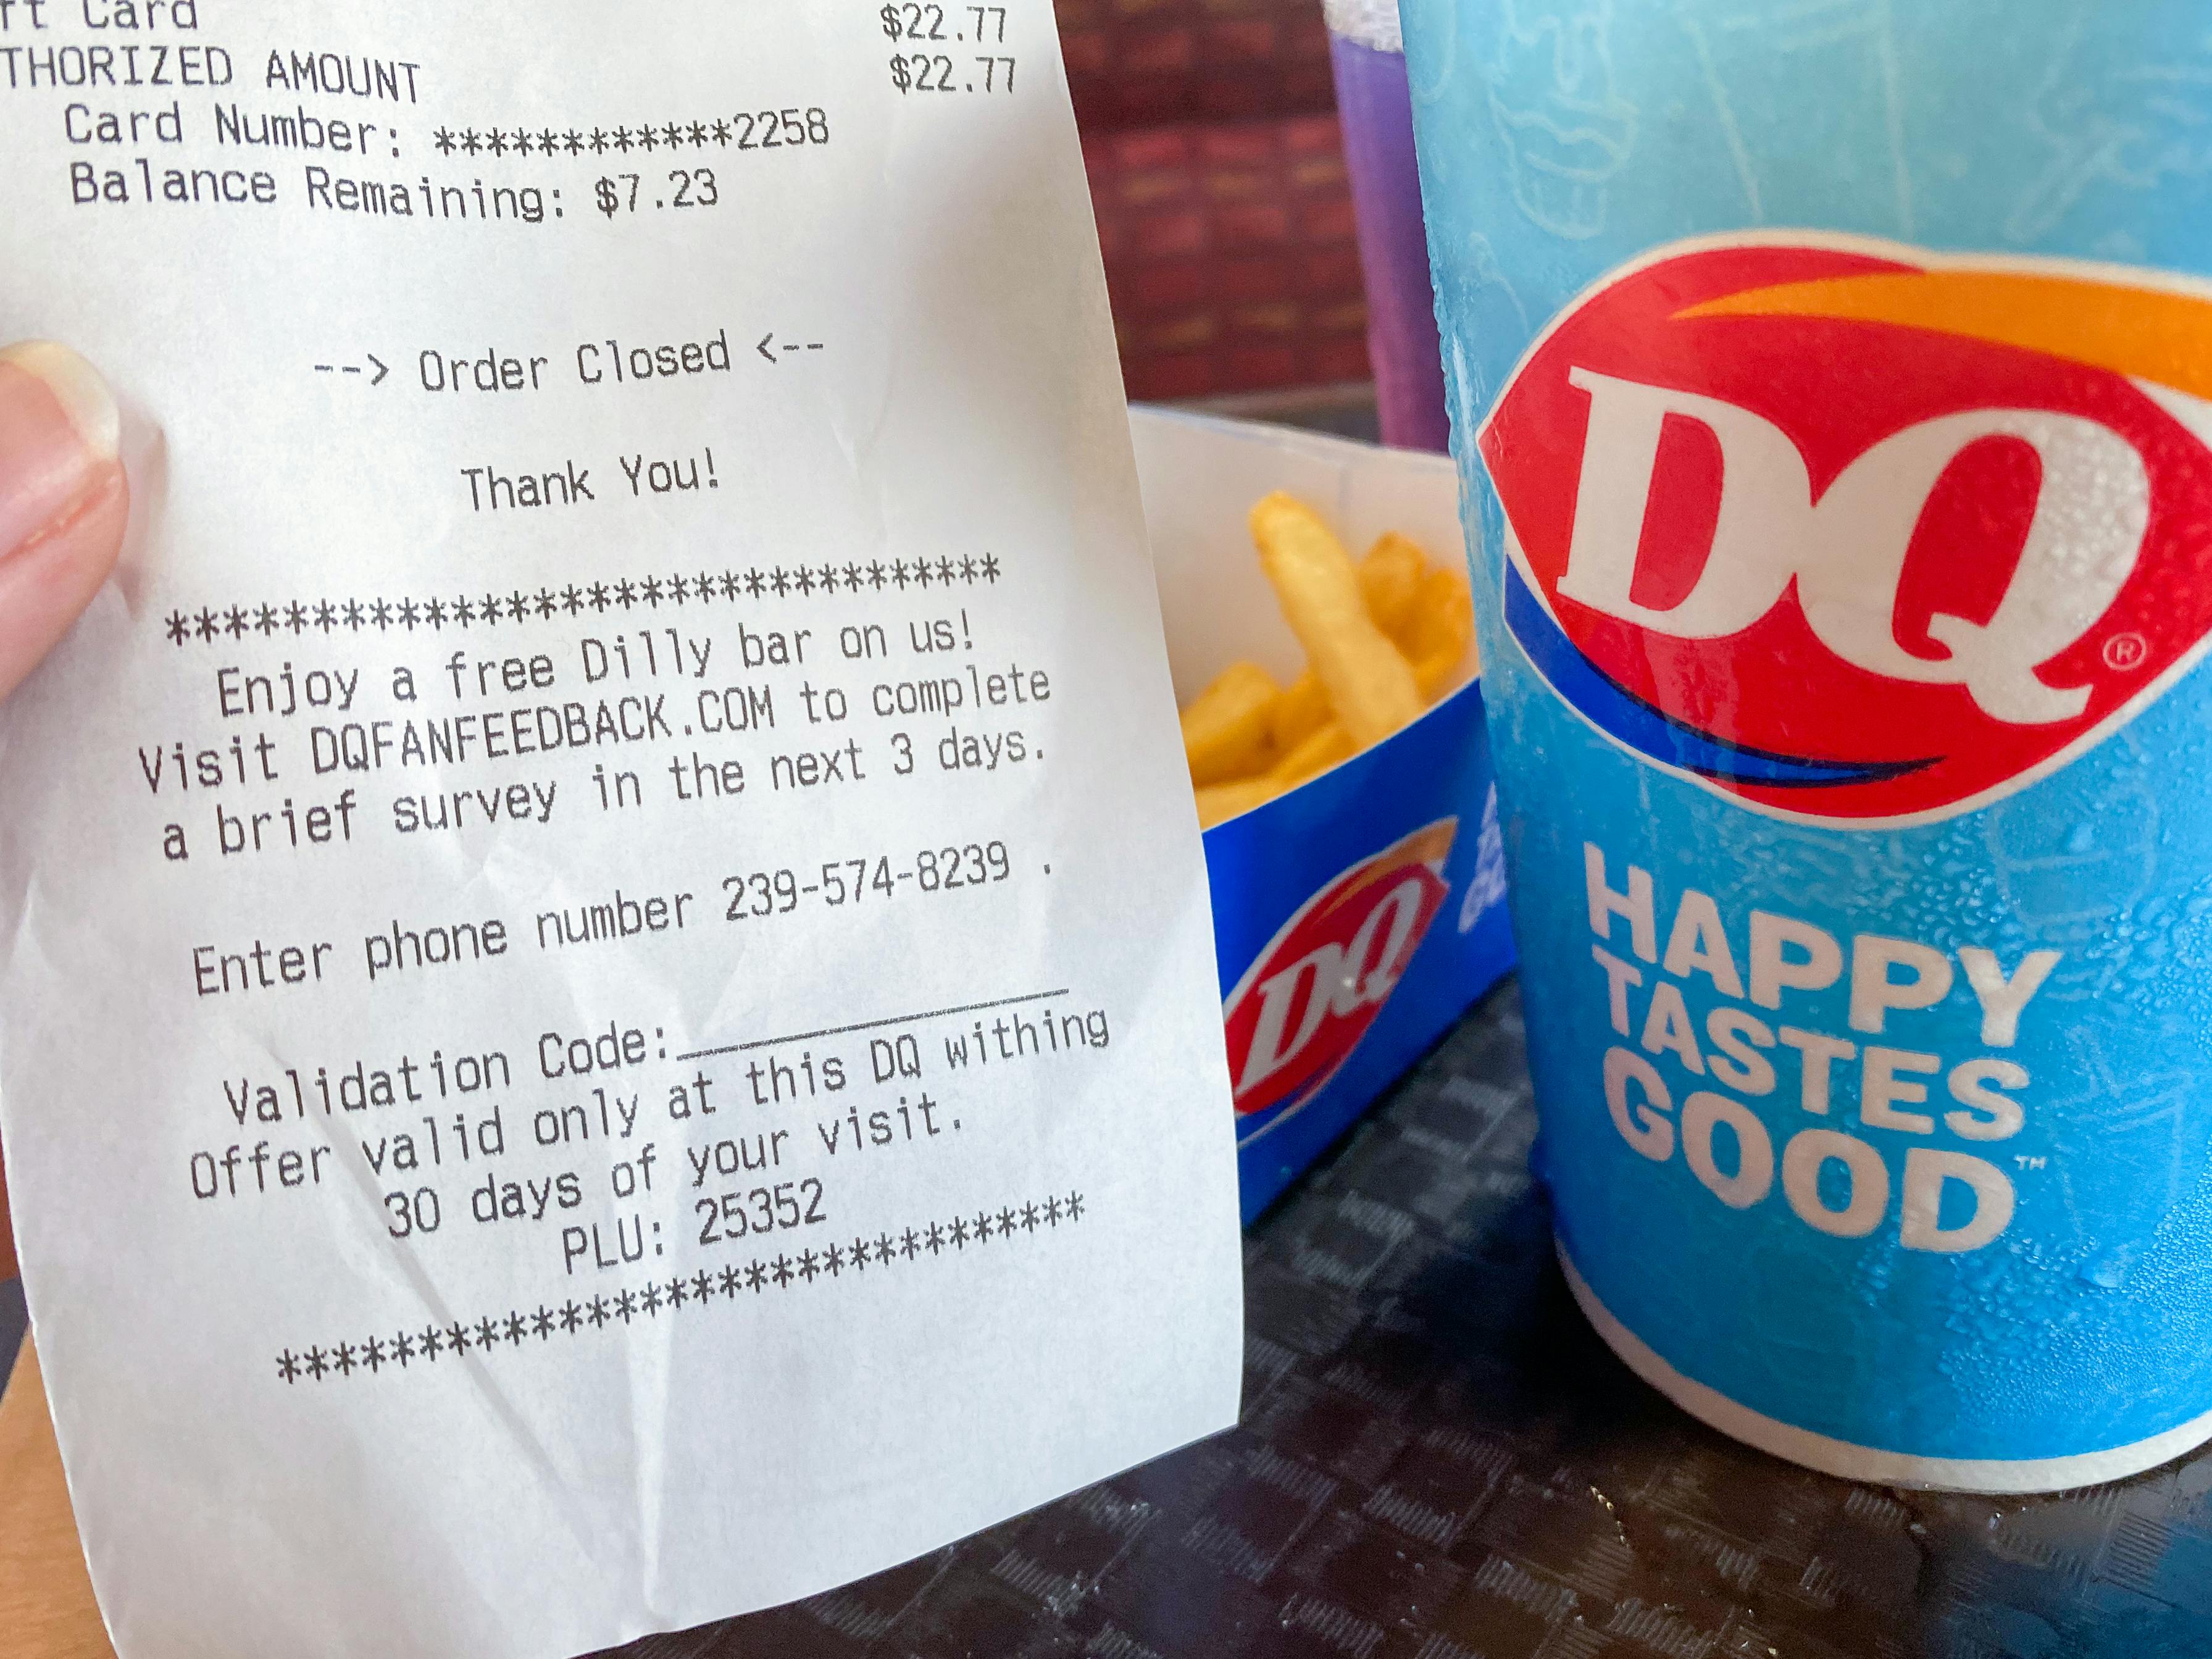 A close-up of a Dairy Queen receipt next to a Blizzard cup sitting on a table inside Dairy Queen.